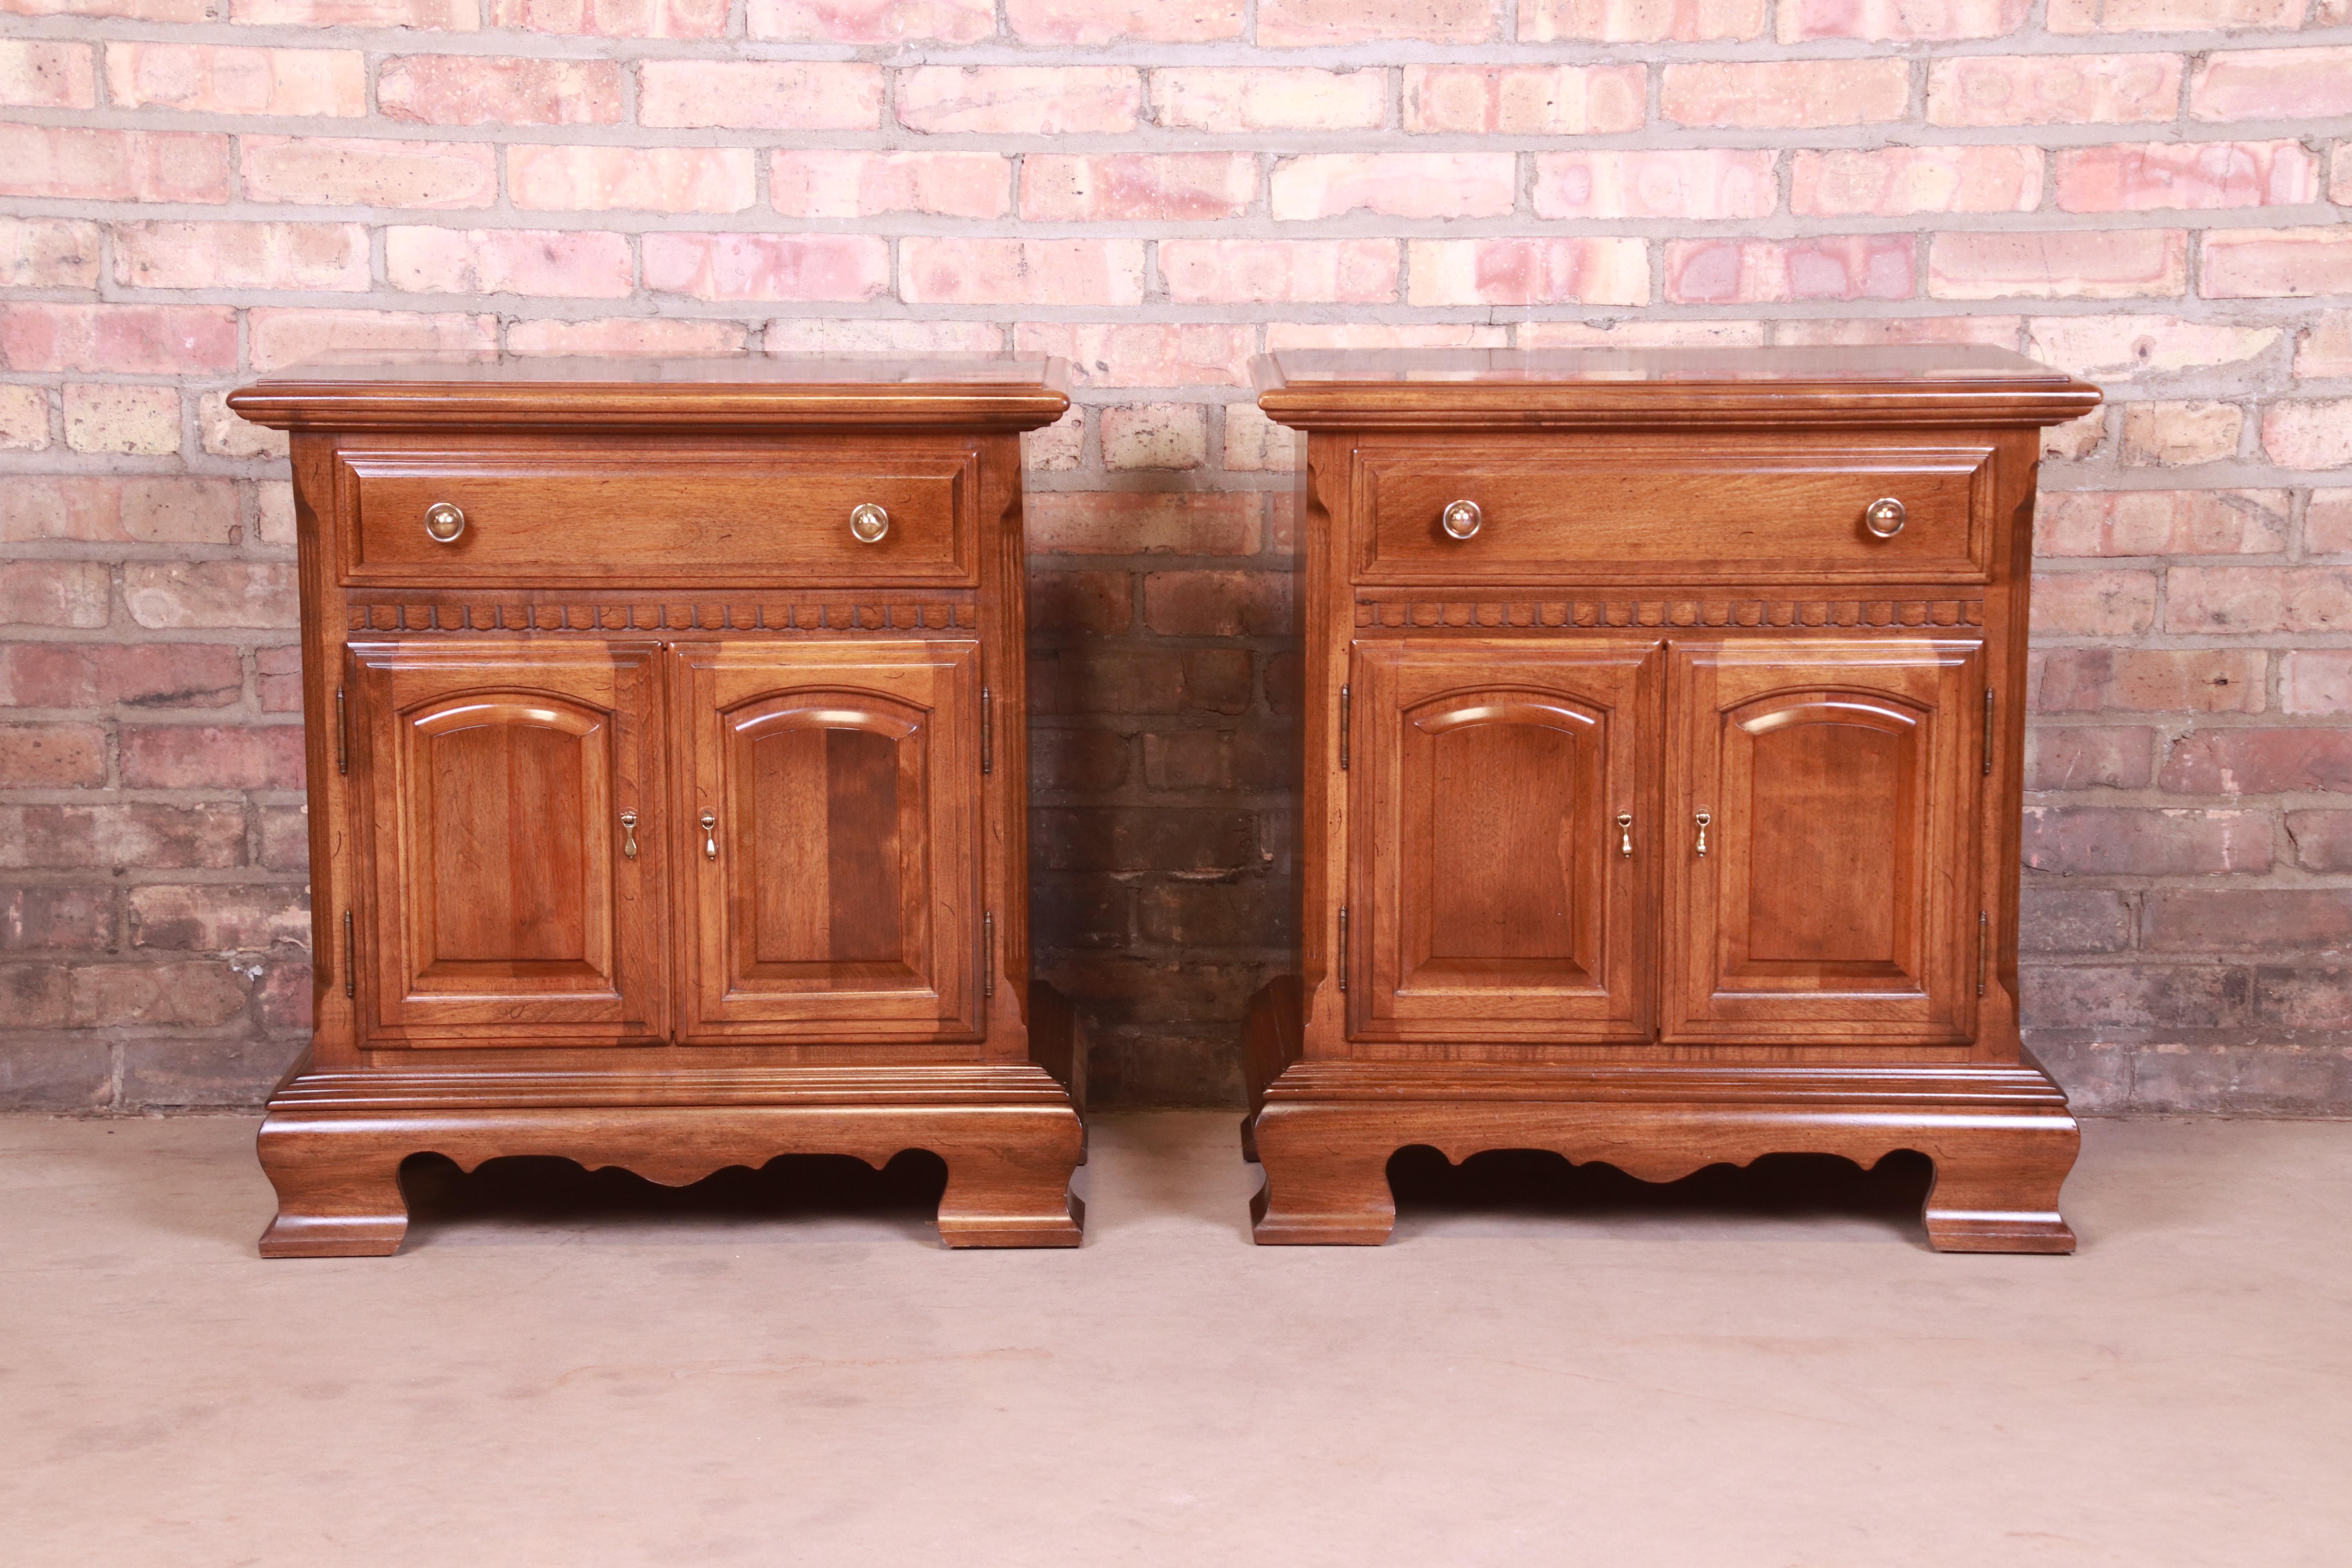 A gorgeous pair of American Colonial or Chippendale style nightstands

By Ethan Allen

USA, circa 1970s

Solid cherry wood, with original brass hardware.

Measures: 24.5